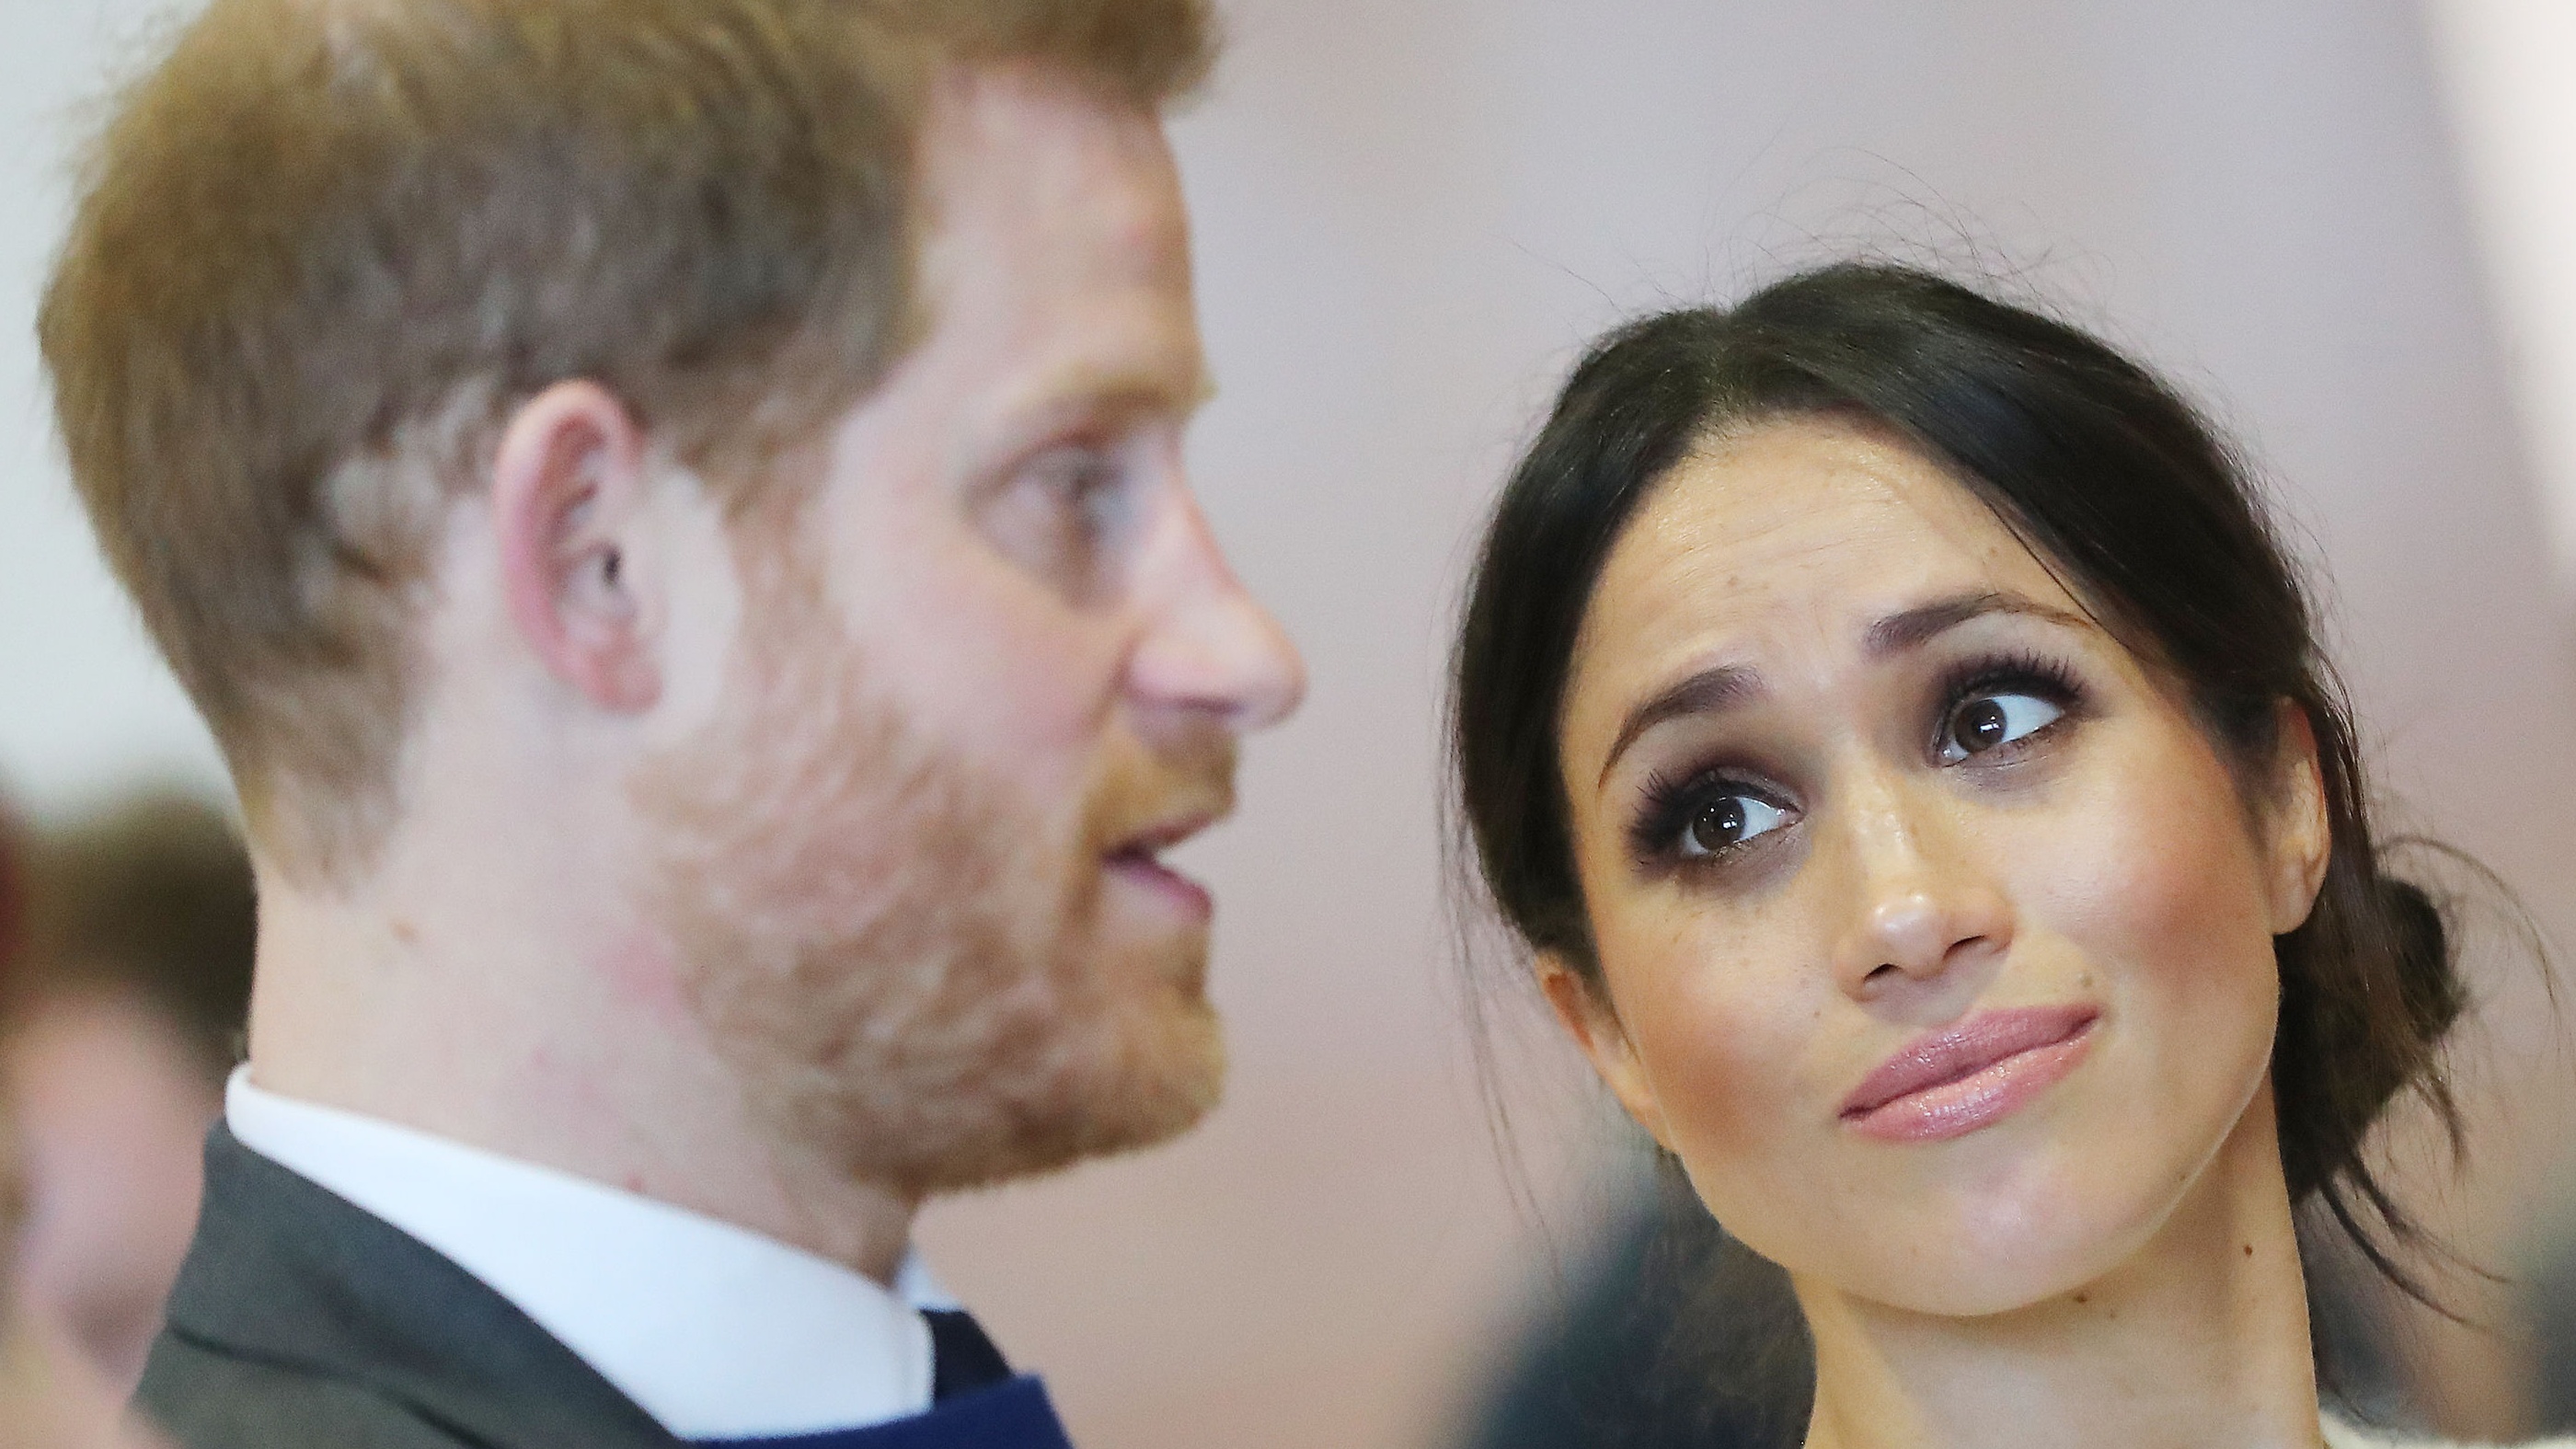 Prince Harry and Meghan Markle during a visit to Northern Ireland in 2019